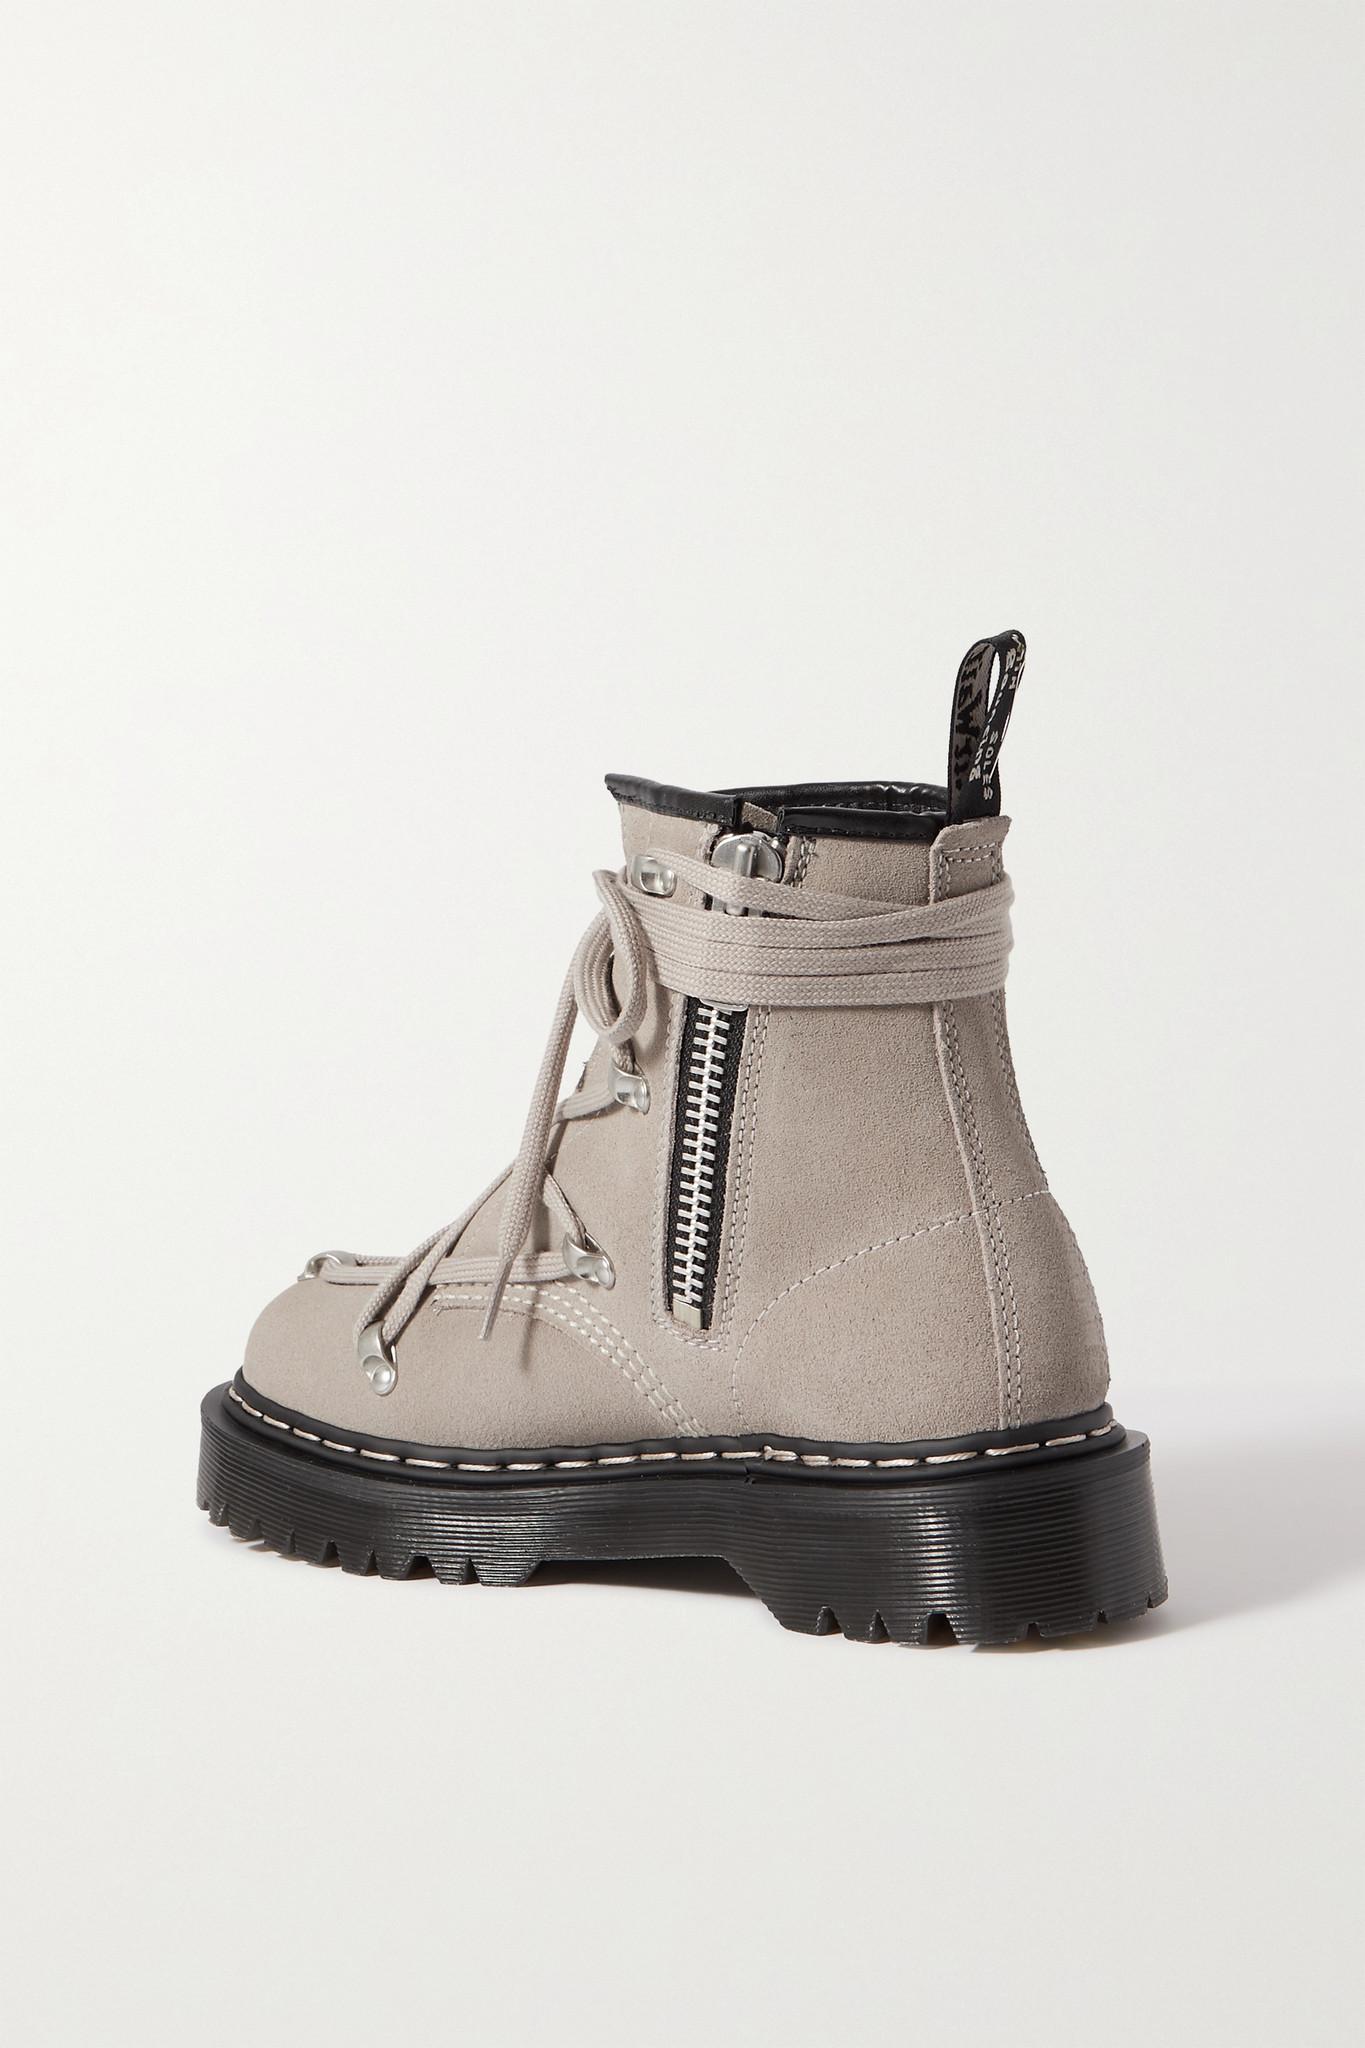 Rick Owens + Dr. Martens 1460 Bex Suede Ankle Boots in Natural | Lyst